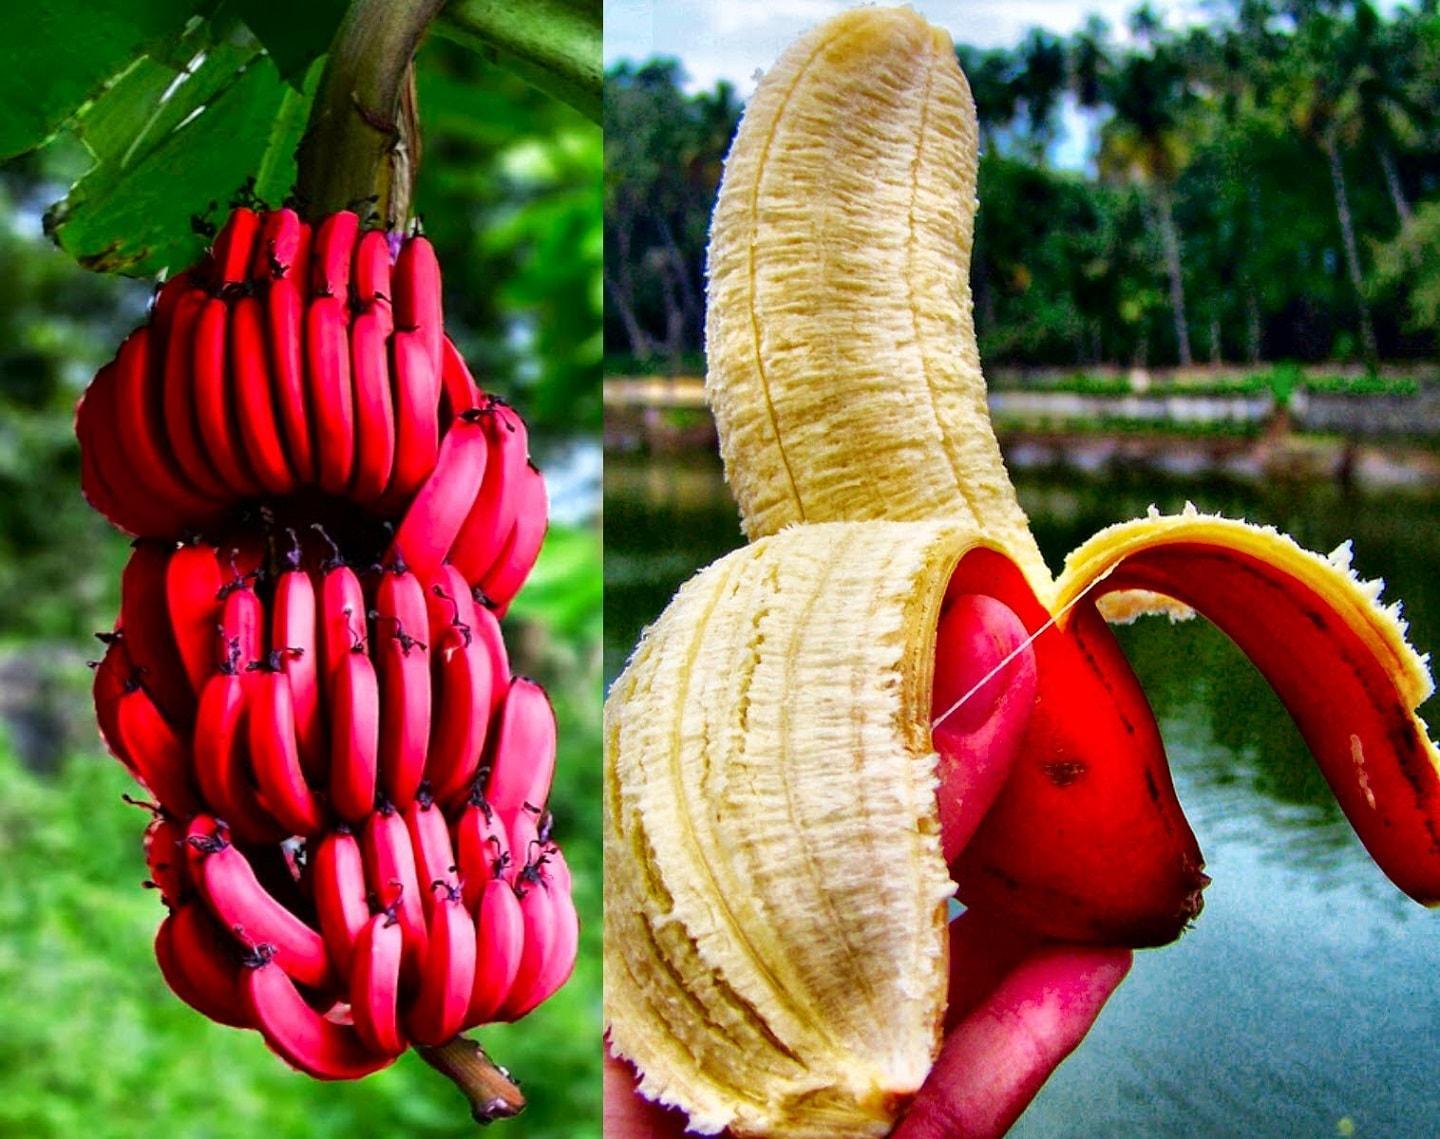 Red and Yellow Banana Logo - Red bananas: Fruitier than their yellow vousins